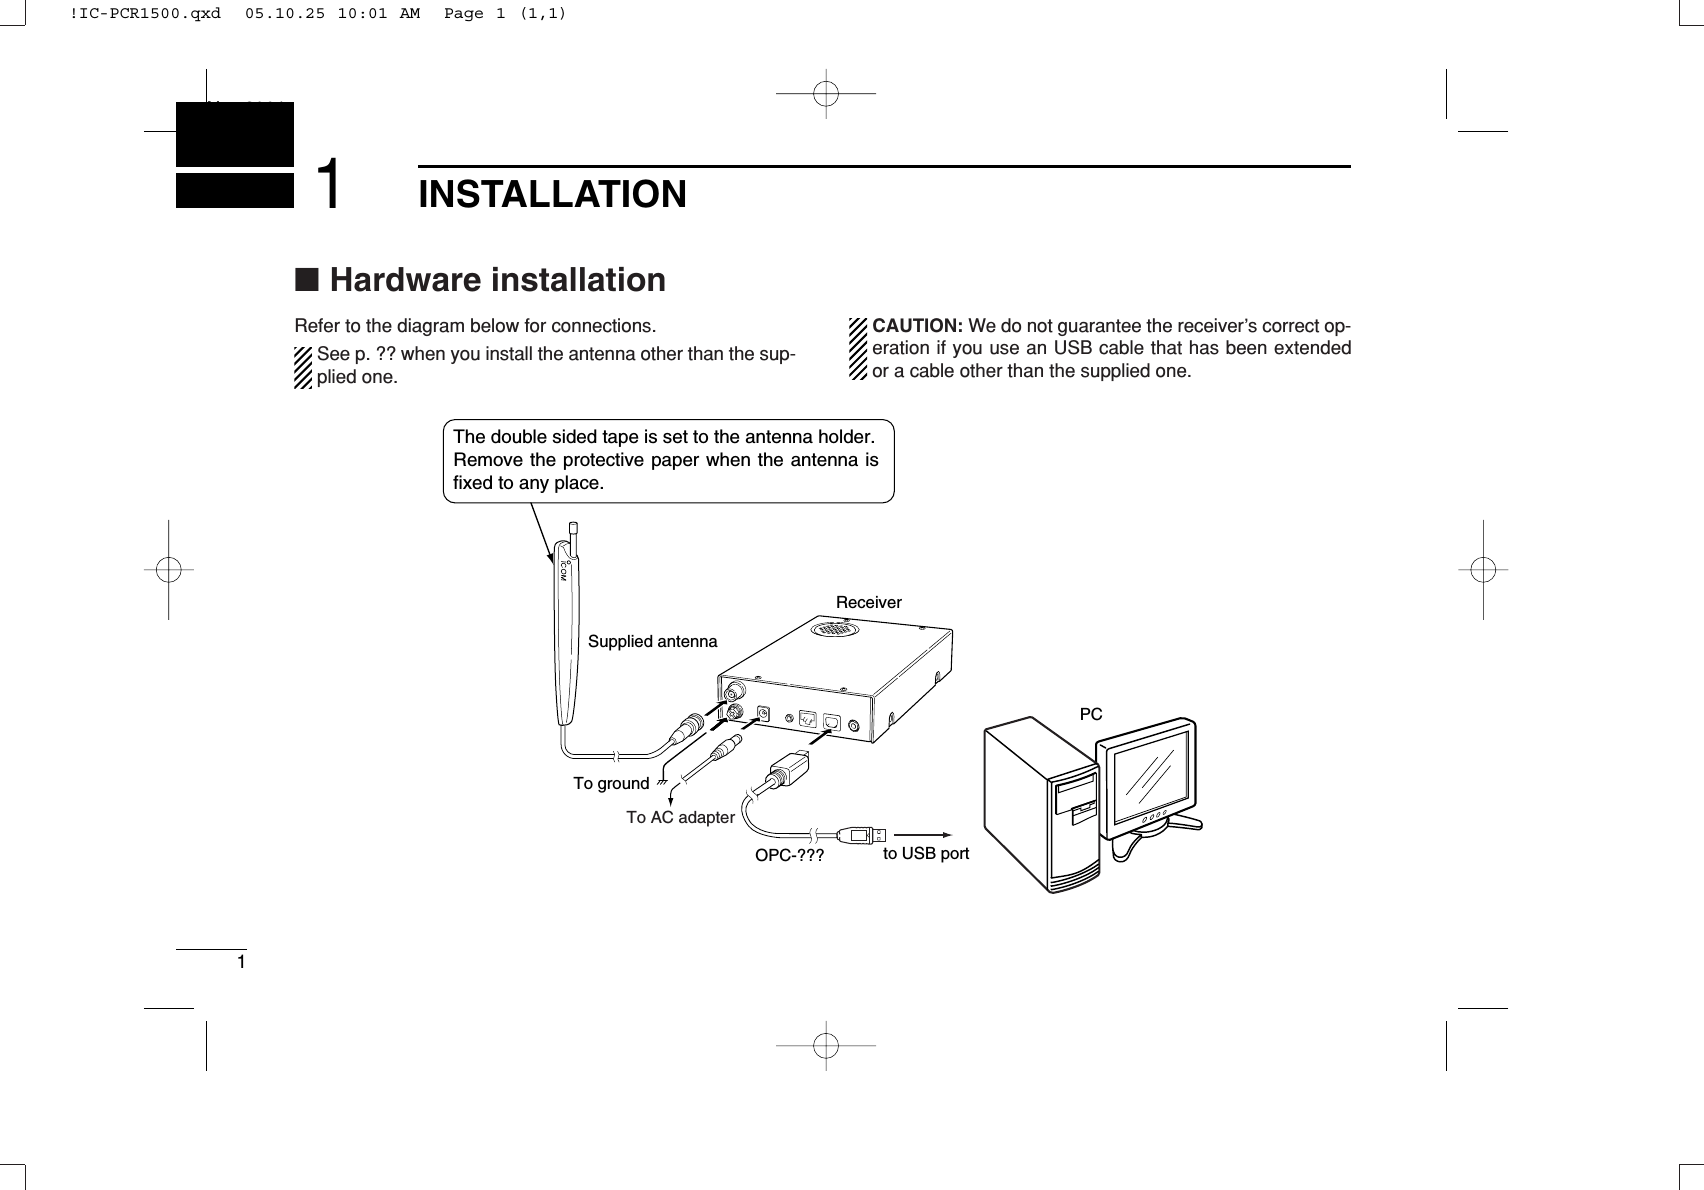 1INSTALLATIONNew20011■Hardware installationRefer to the diagram below for connections.See p. ?? when you install the antenna other than the sup-plied one.CAUTION: We do not guarantee the receiver’s correct op-eration if you use an USB cable that has been extendedor a cable other than the supplied one.ReceiverTo groundSupplied antennaPCTo AC adapterto USB portOPC-???The double sided tape is set to the antenna holder.Remove the protective paper when the antenna is fixed to any place.!IC-PCR1500.qxd  05.10.25 10:01 AM  Page 1 (1,1)